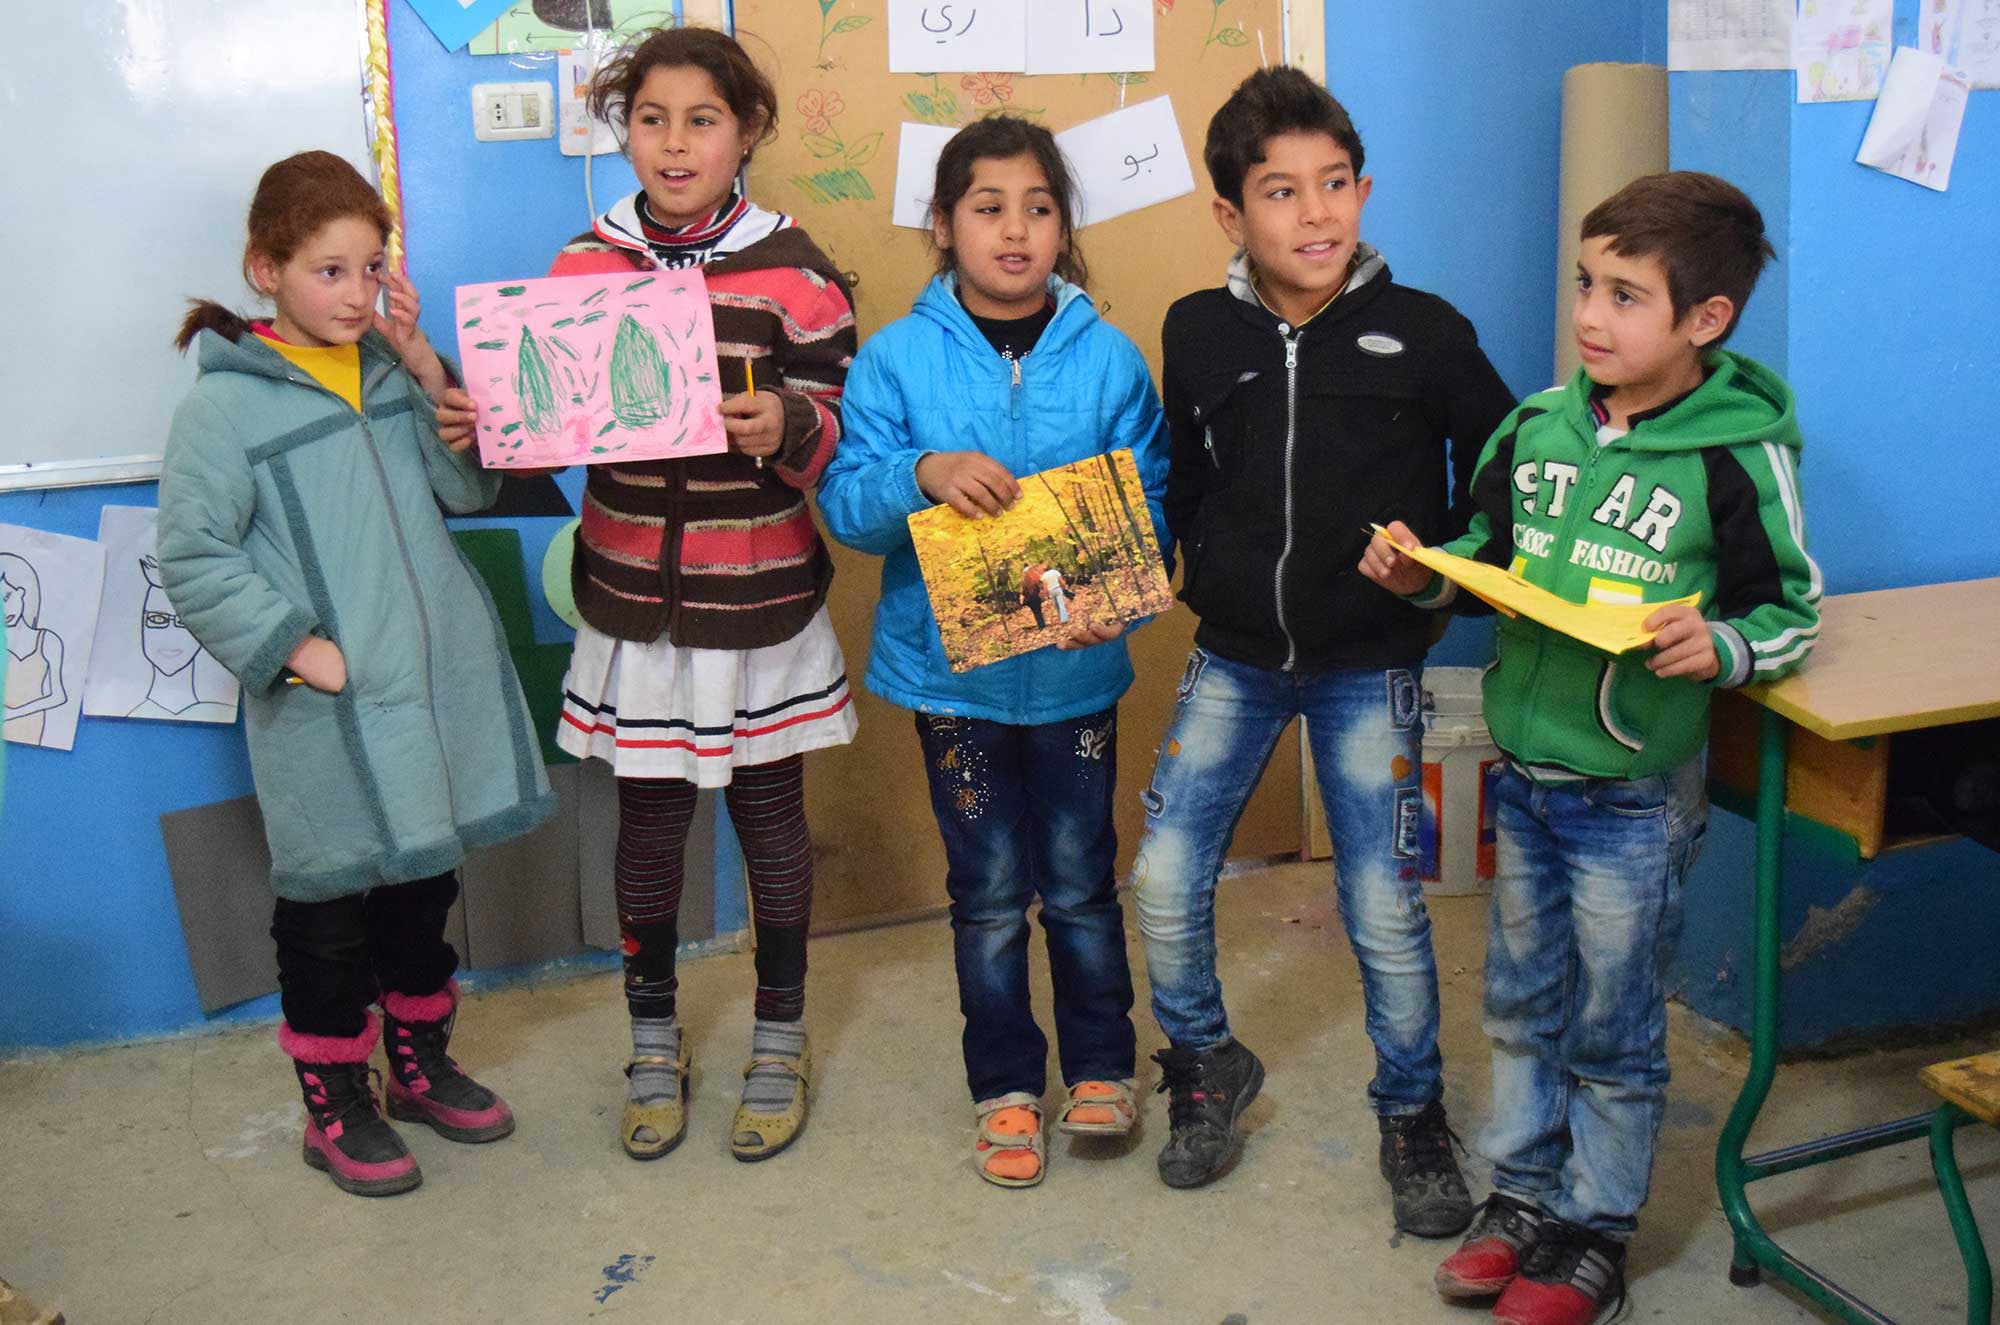 Syrian refugee education gets a boost with donated books